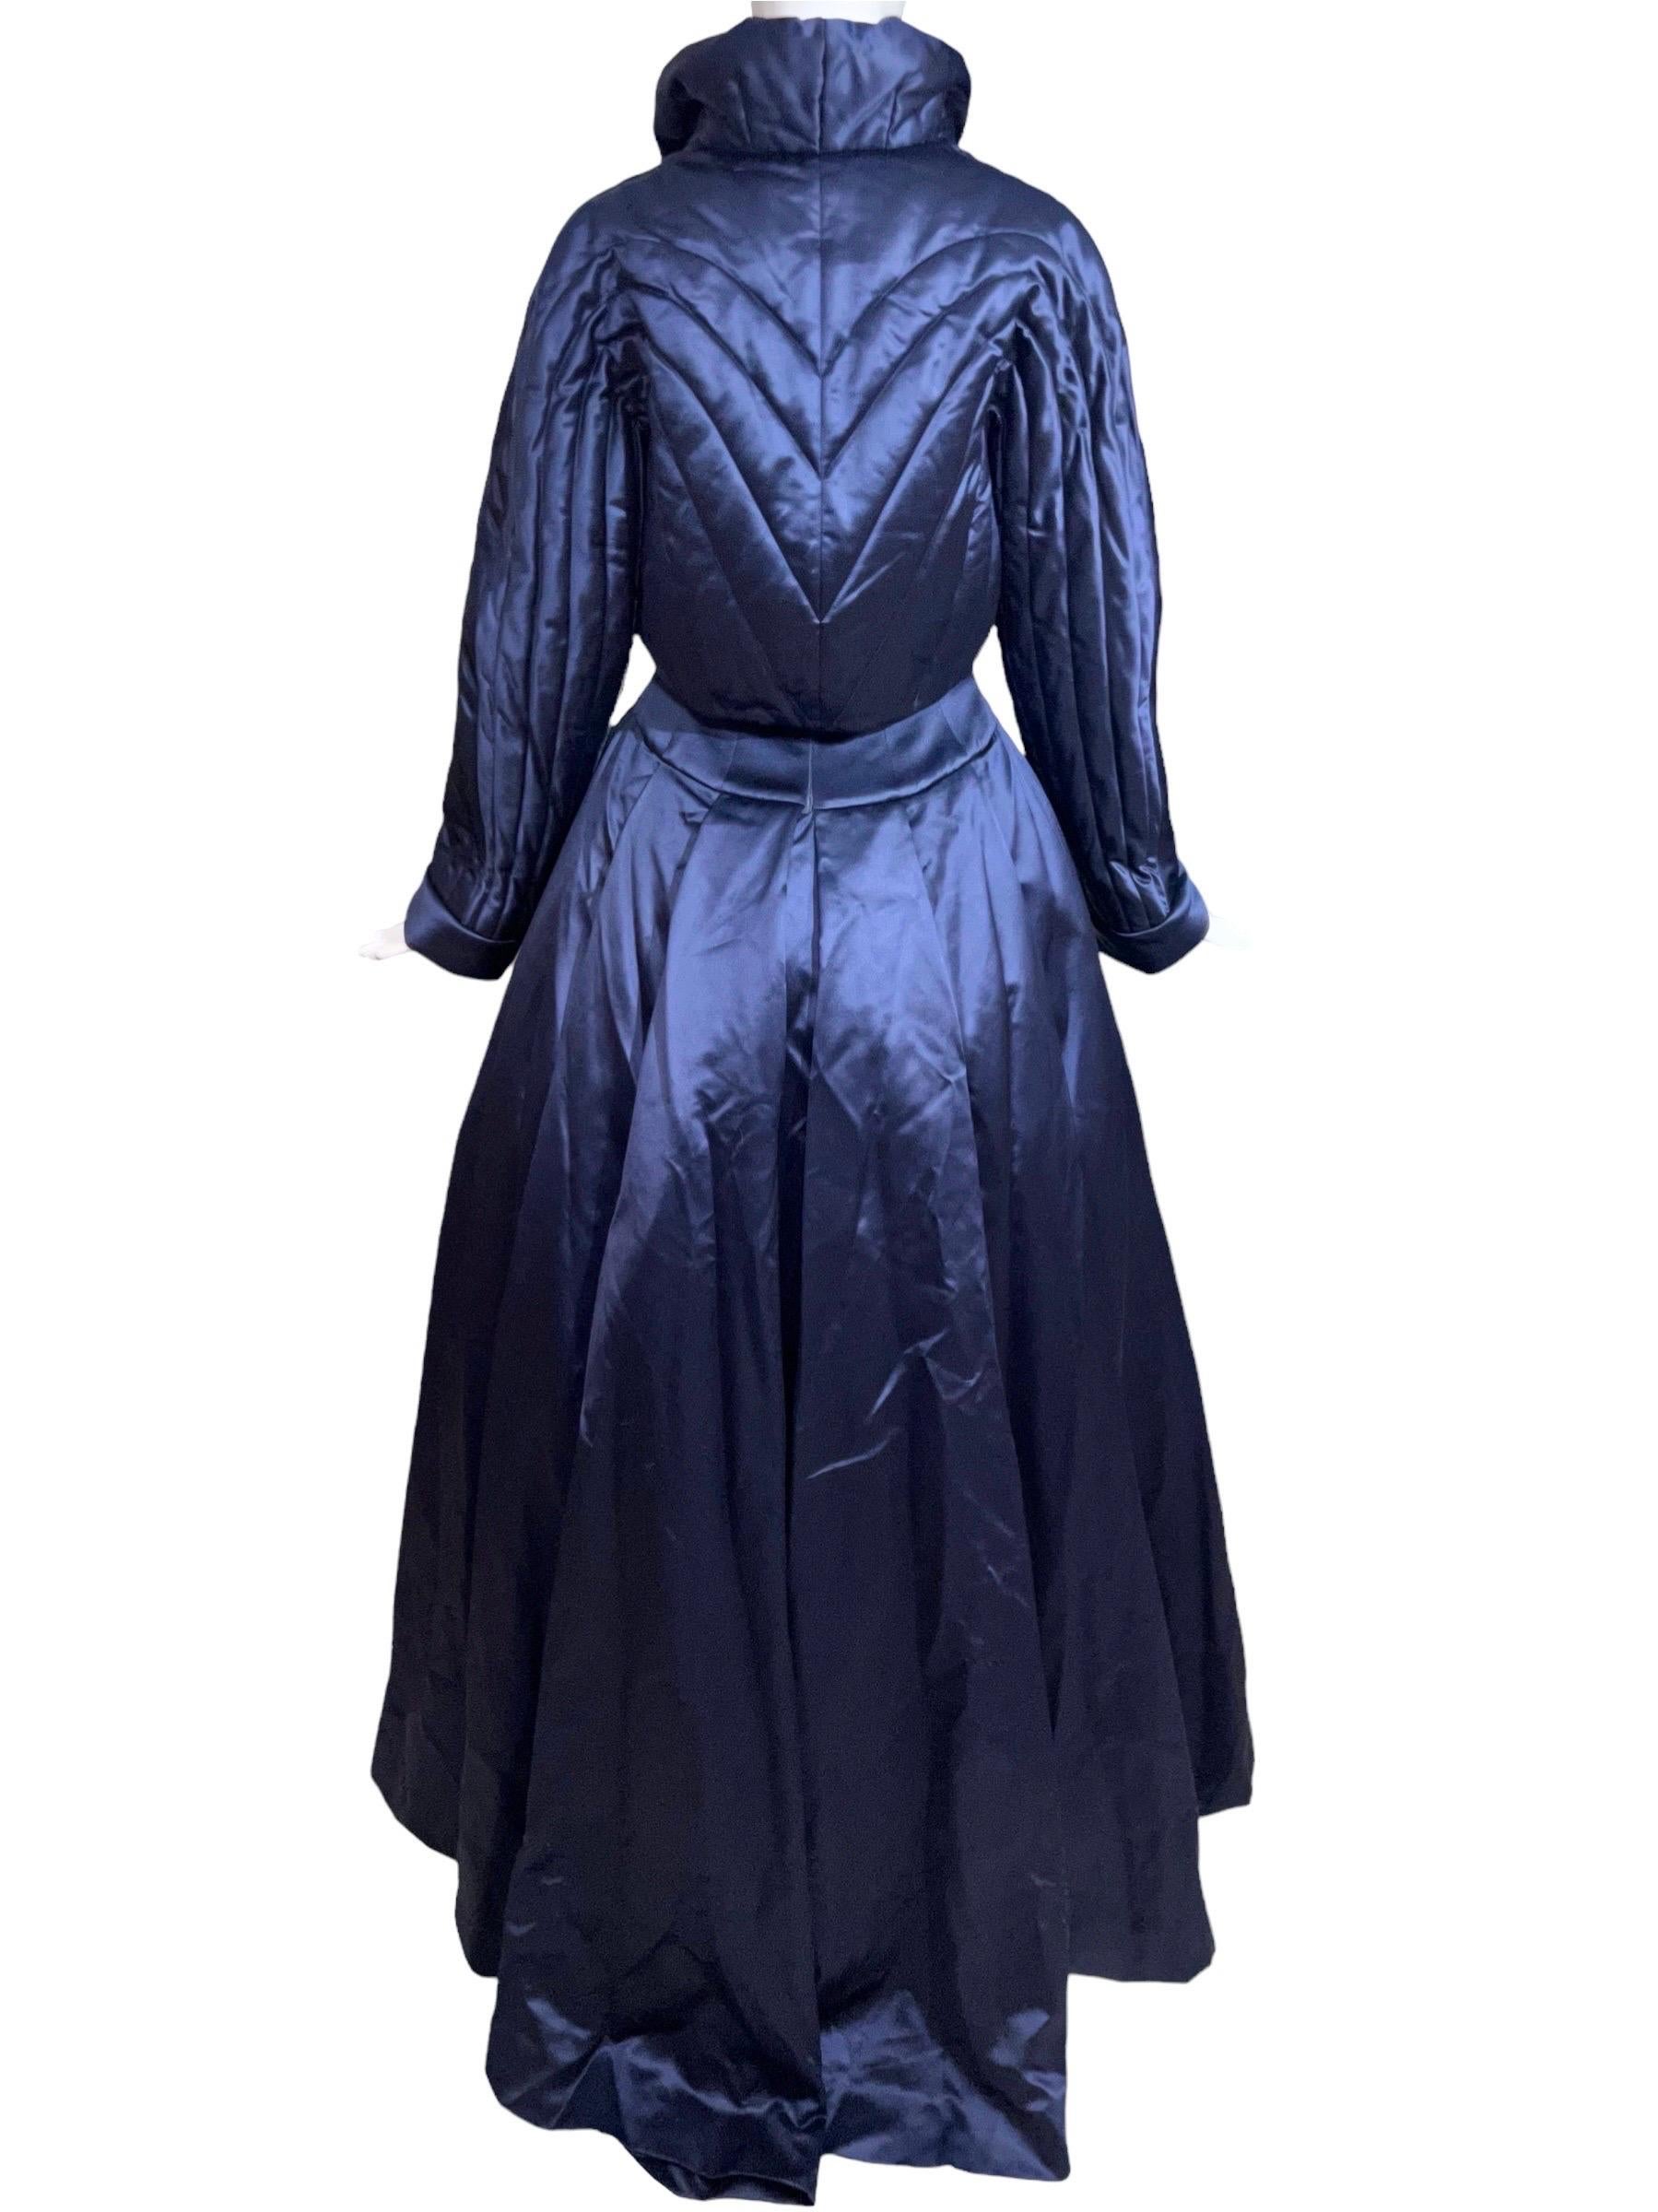 Women's 1990's Thierry Mugler Haute Couture Blue Medieval Gown Jacket Ensemble With Tags